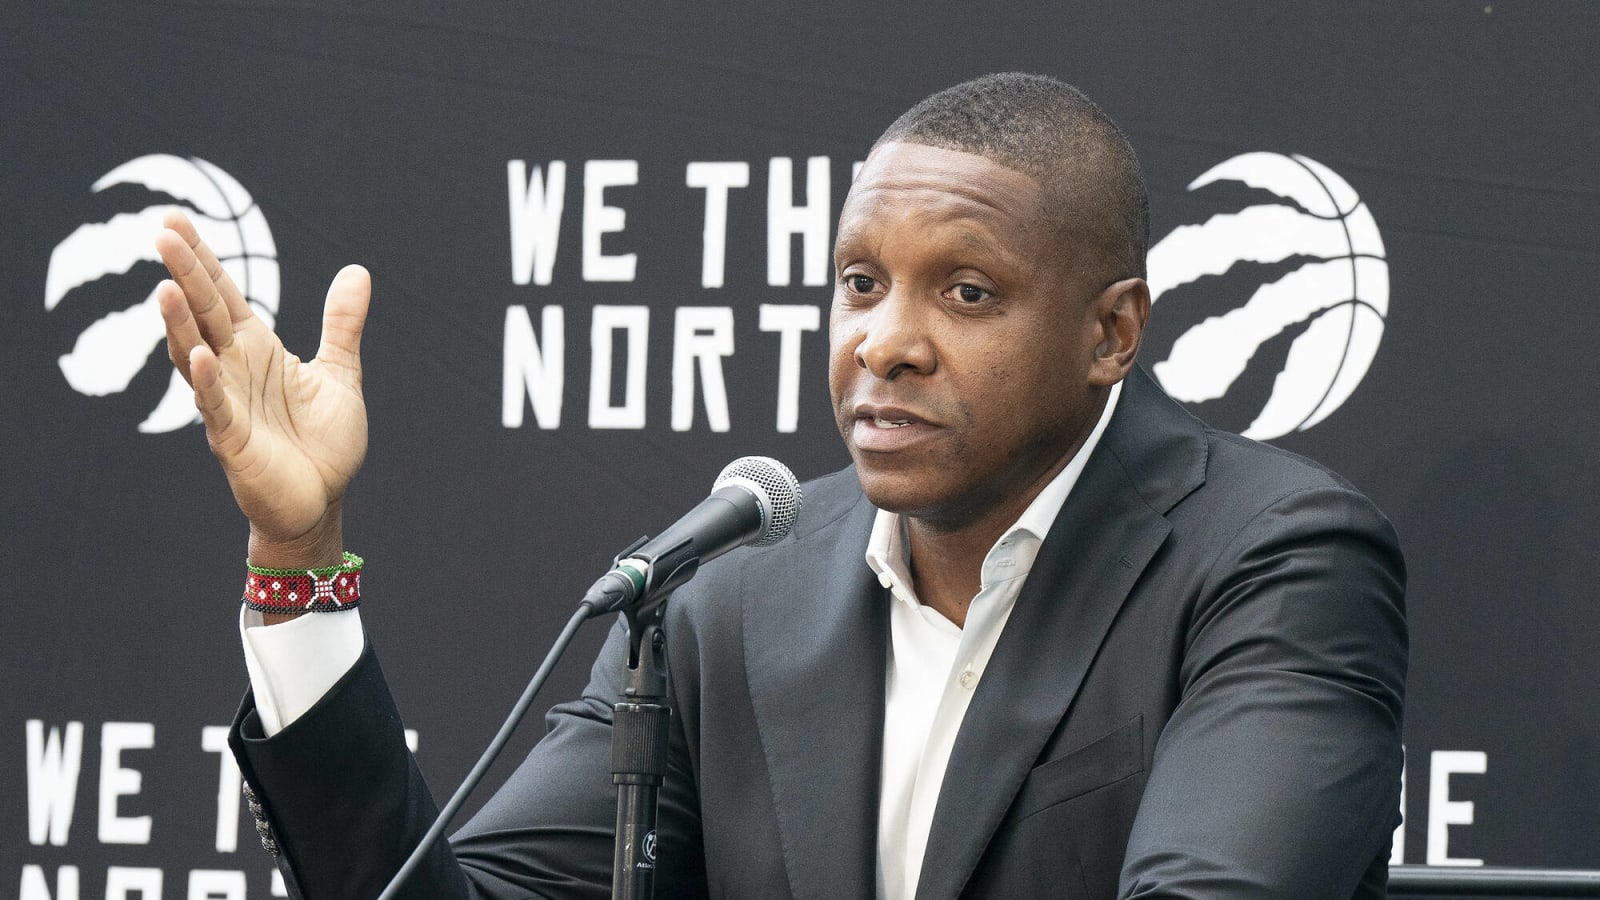 Raptors President Masai Ujiri Indicates He’s Not Interested in Other Openings